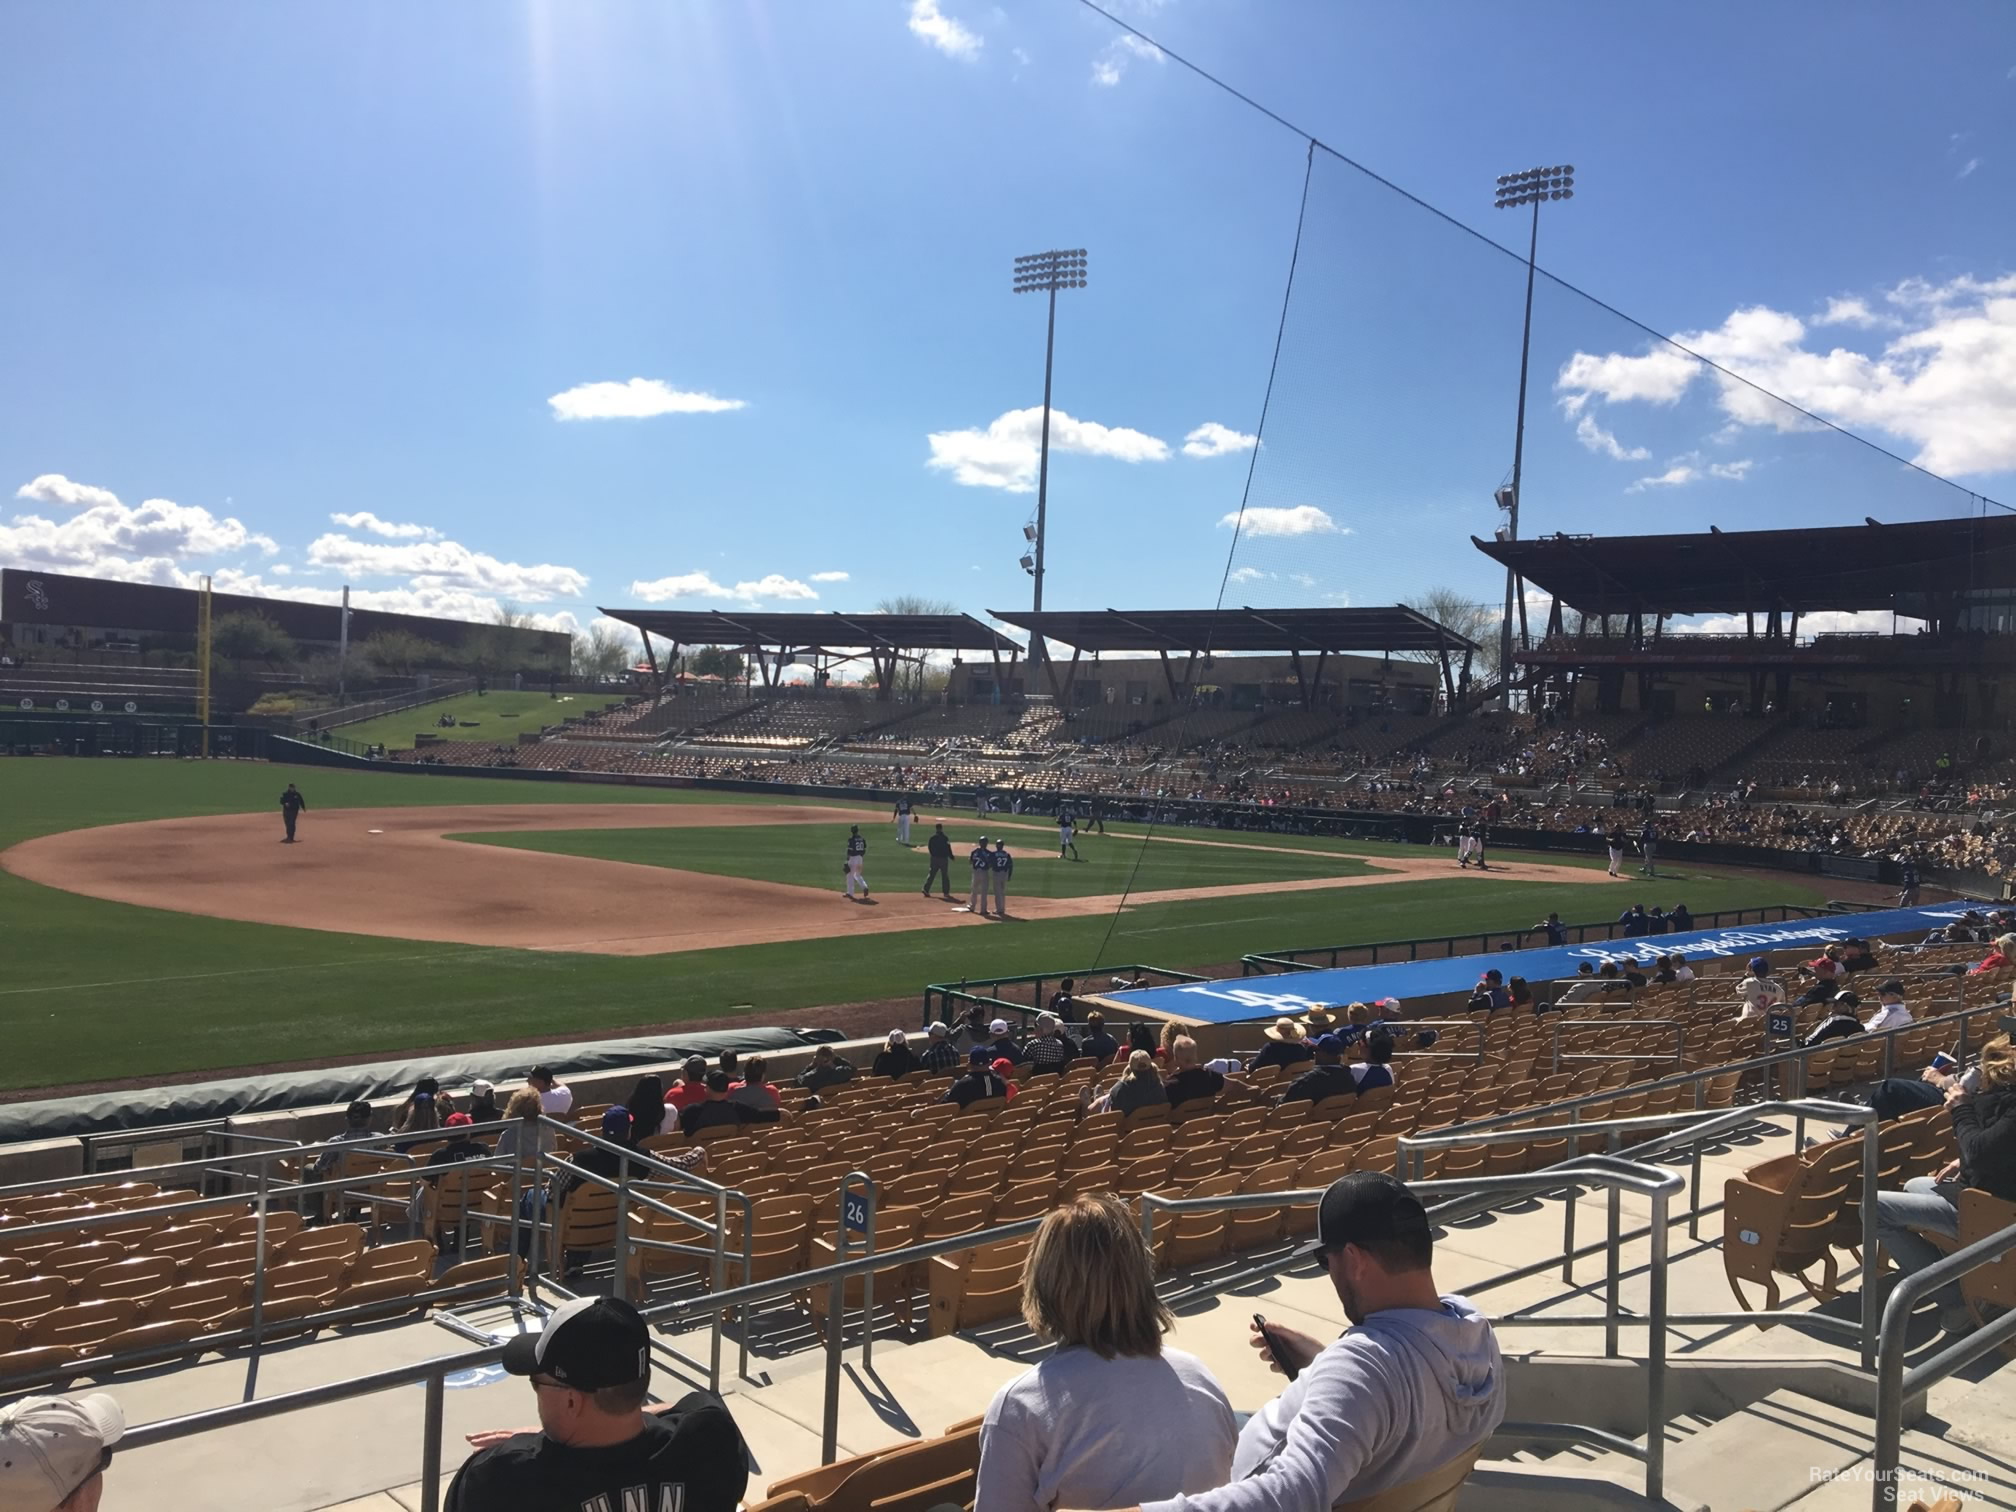 section 126, row 5 seat view  - camelback ranch